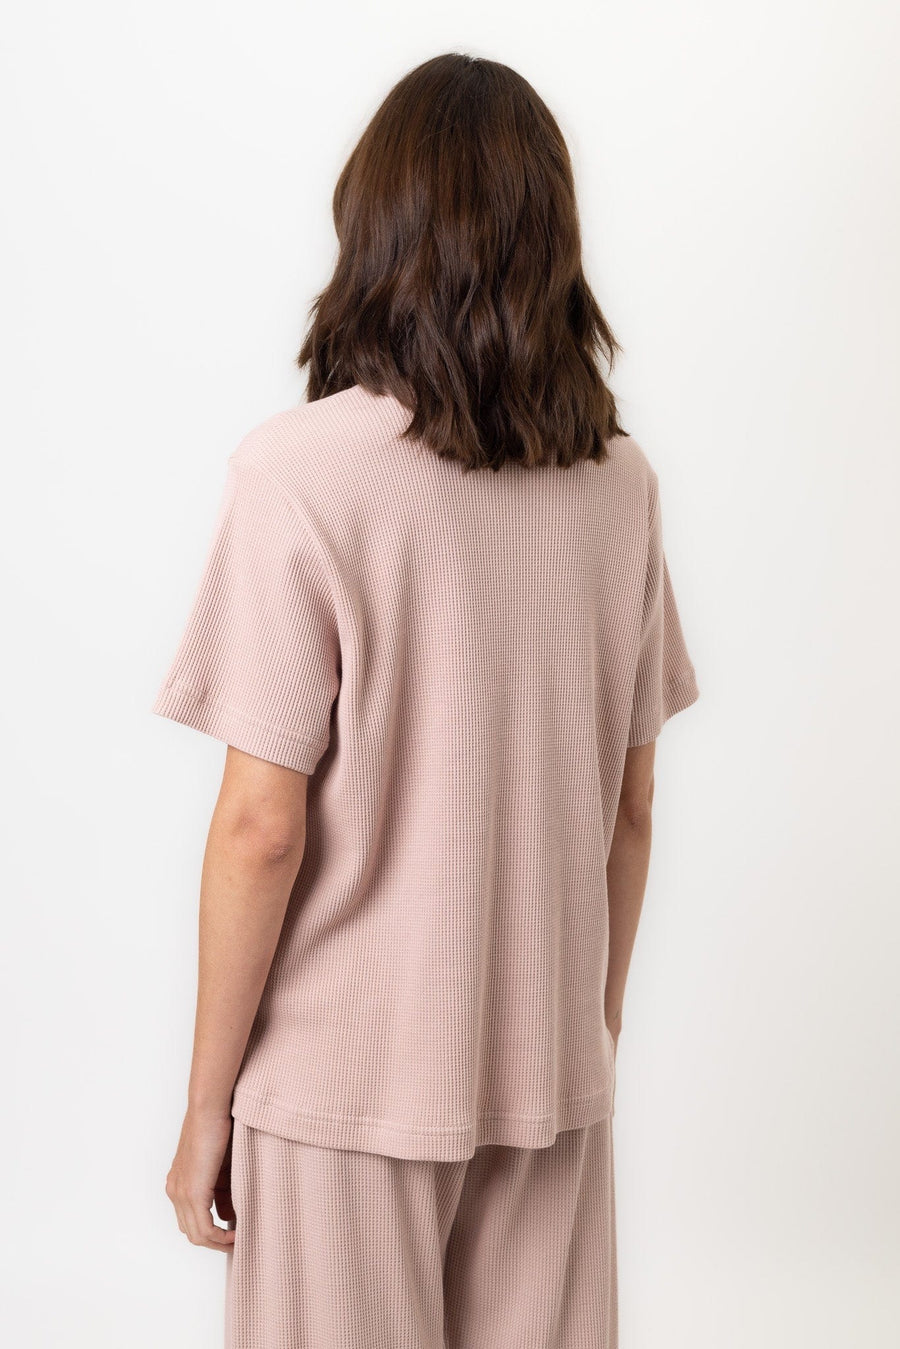 Lush Top | Dusty Pink Lush Top Tops Pajamas Australia Online | Reverie the Label  TOPS Lush Top